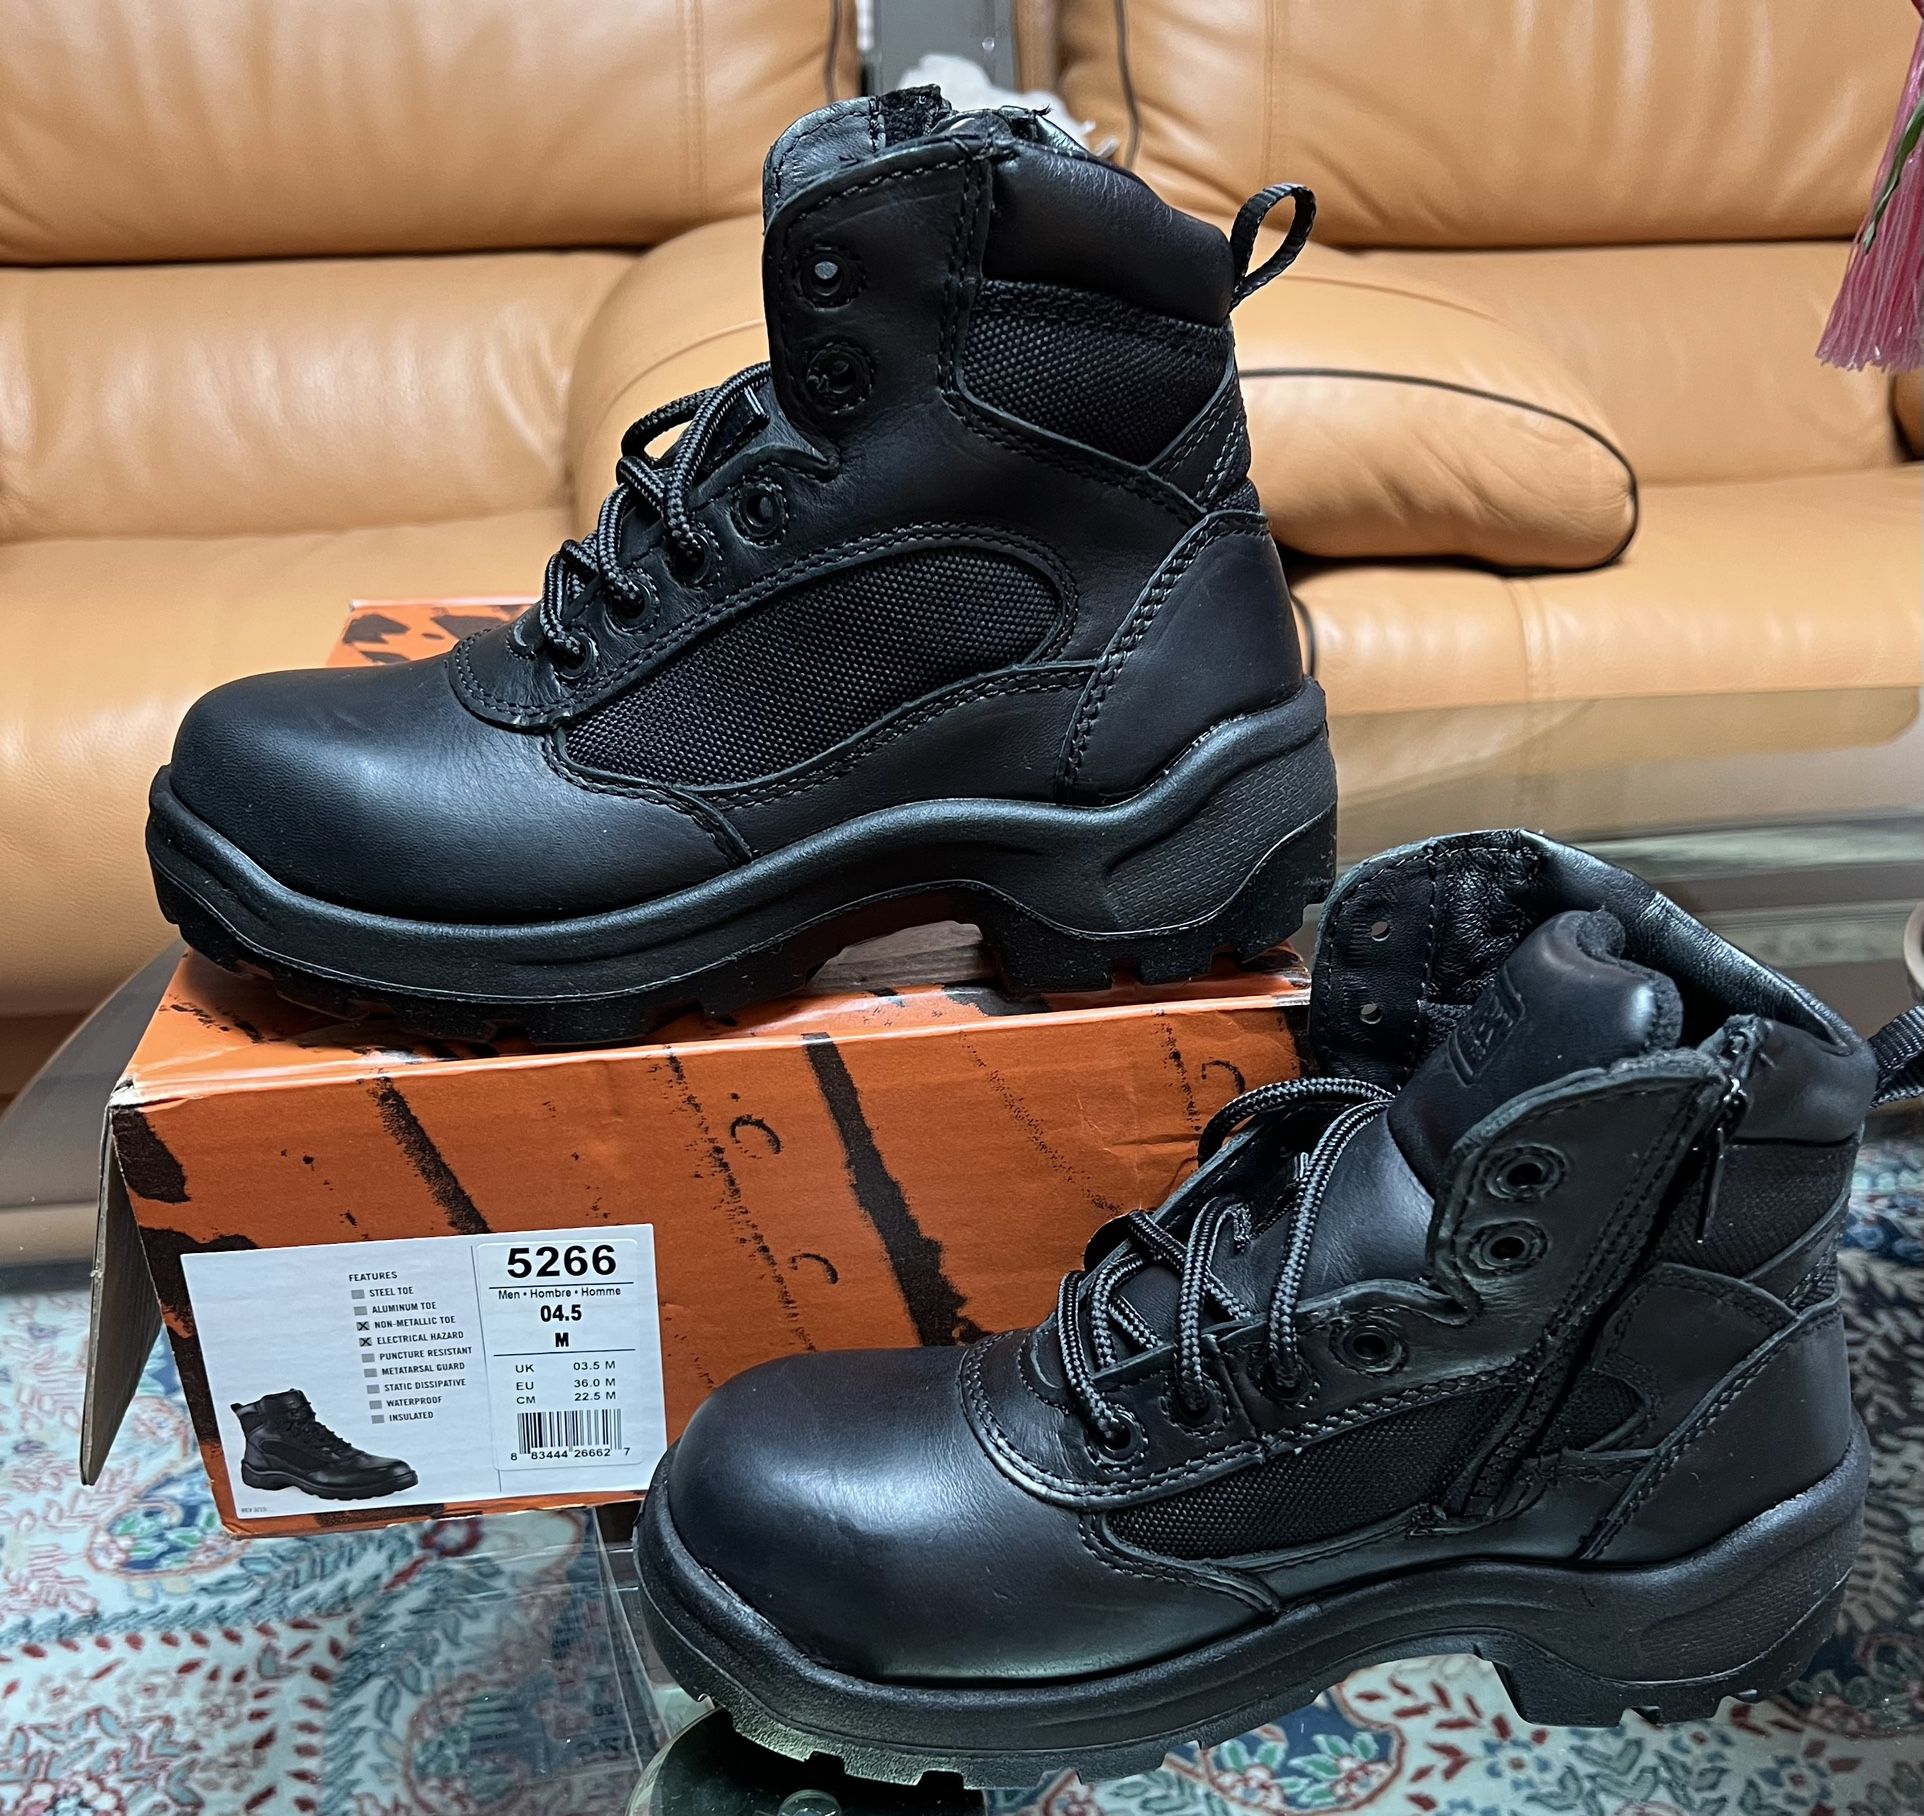 NIB Red Wing worx 5266 work boots